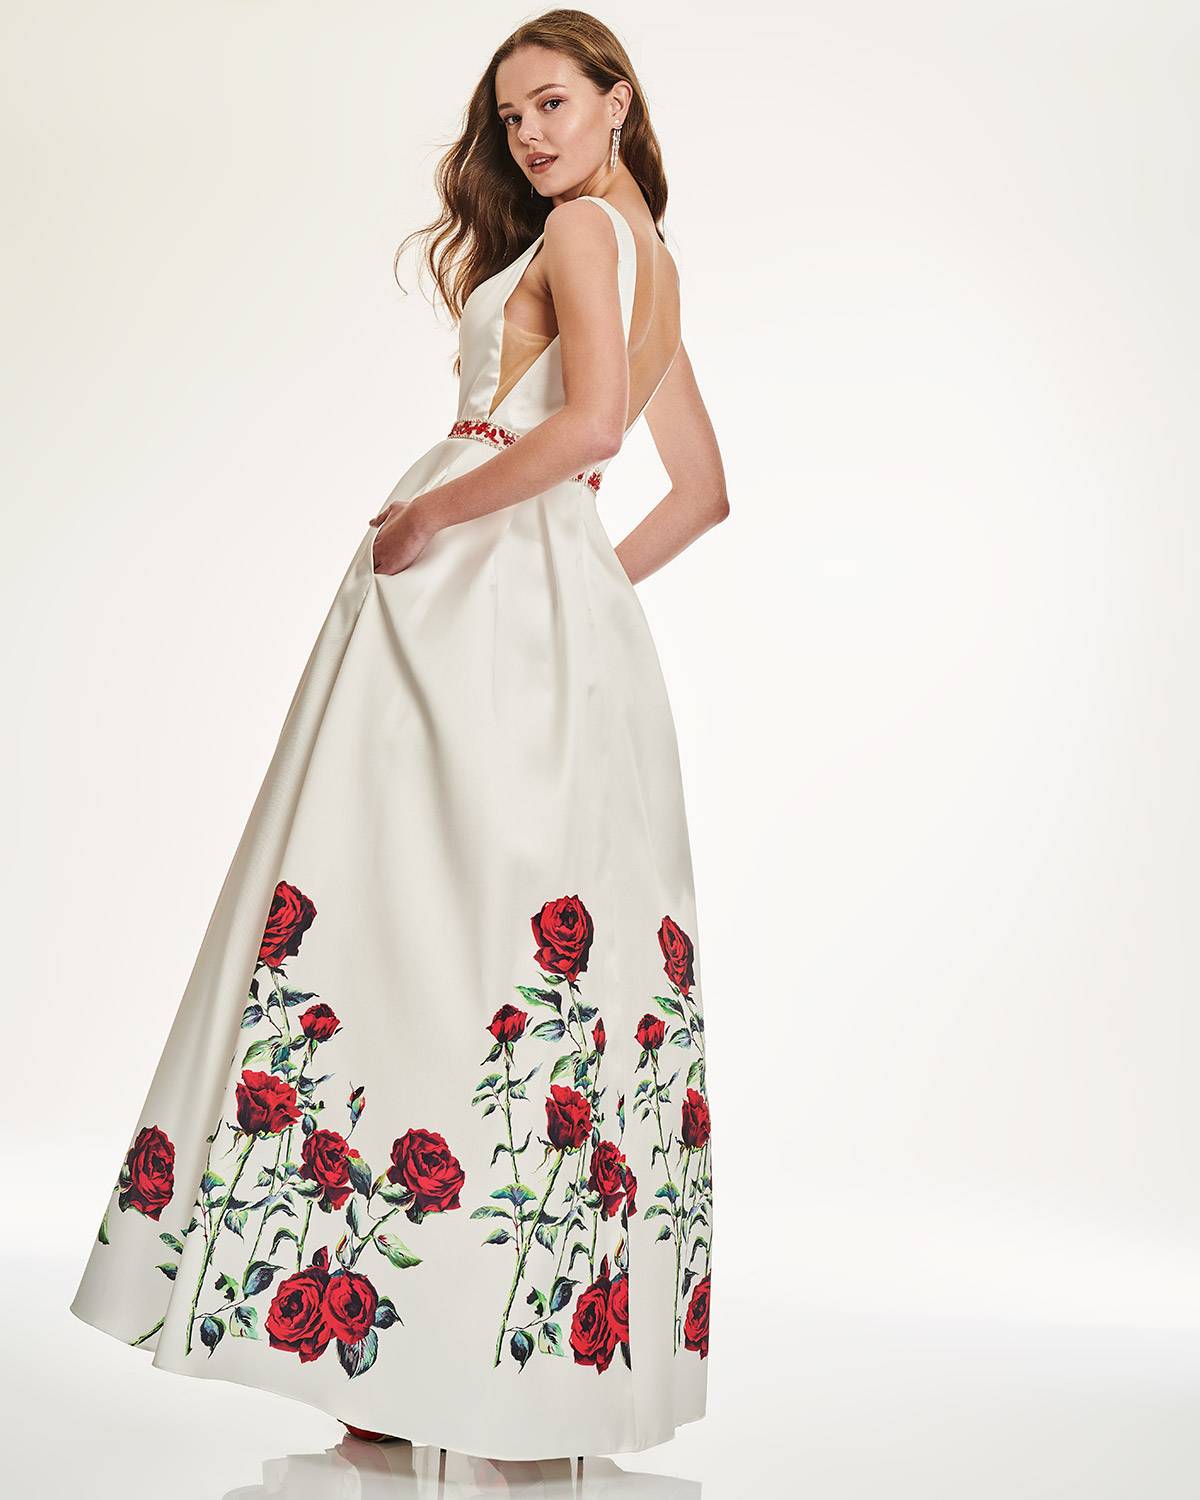 Cocktail Dresses / Long dress with floral motif and beading on the waistbund